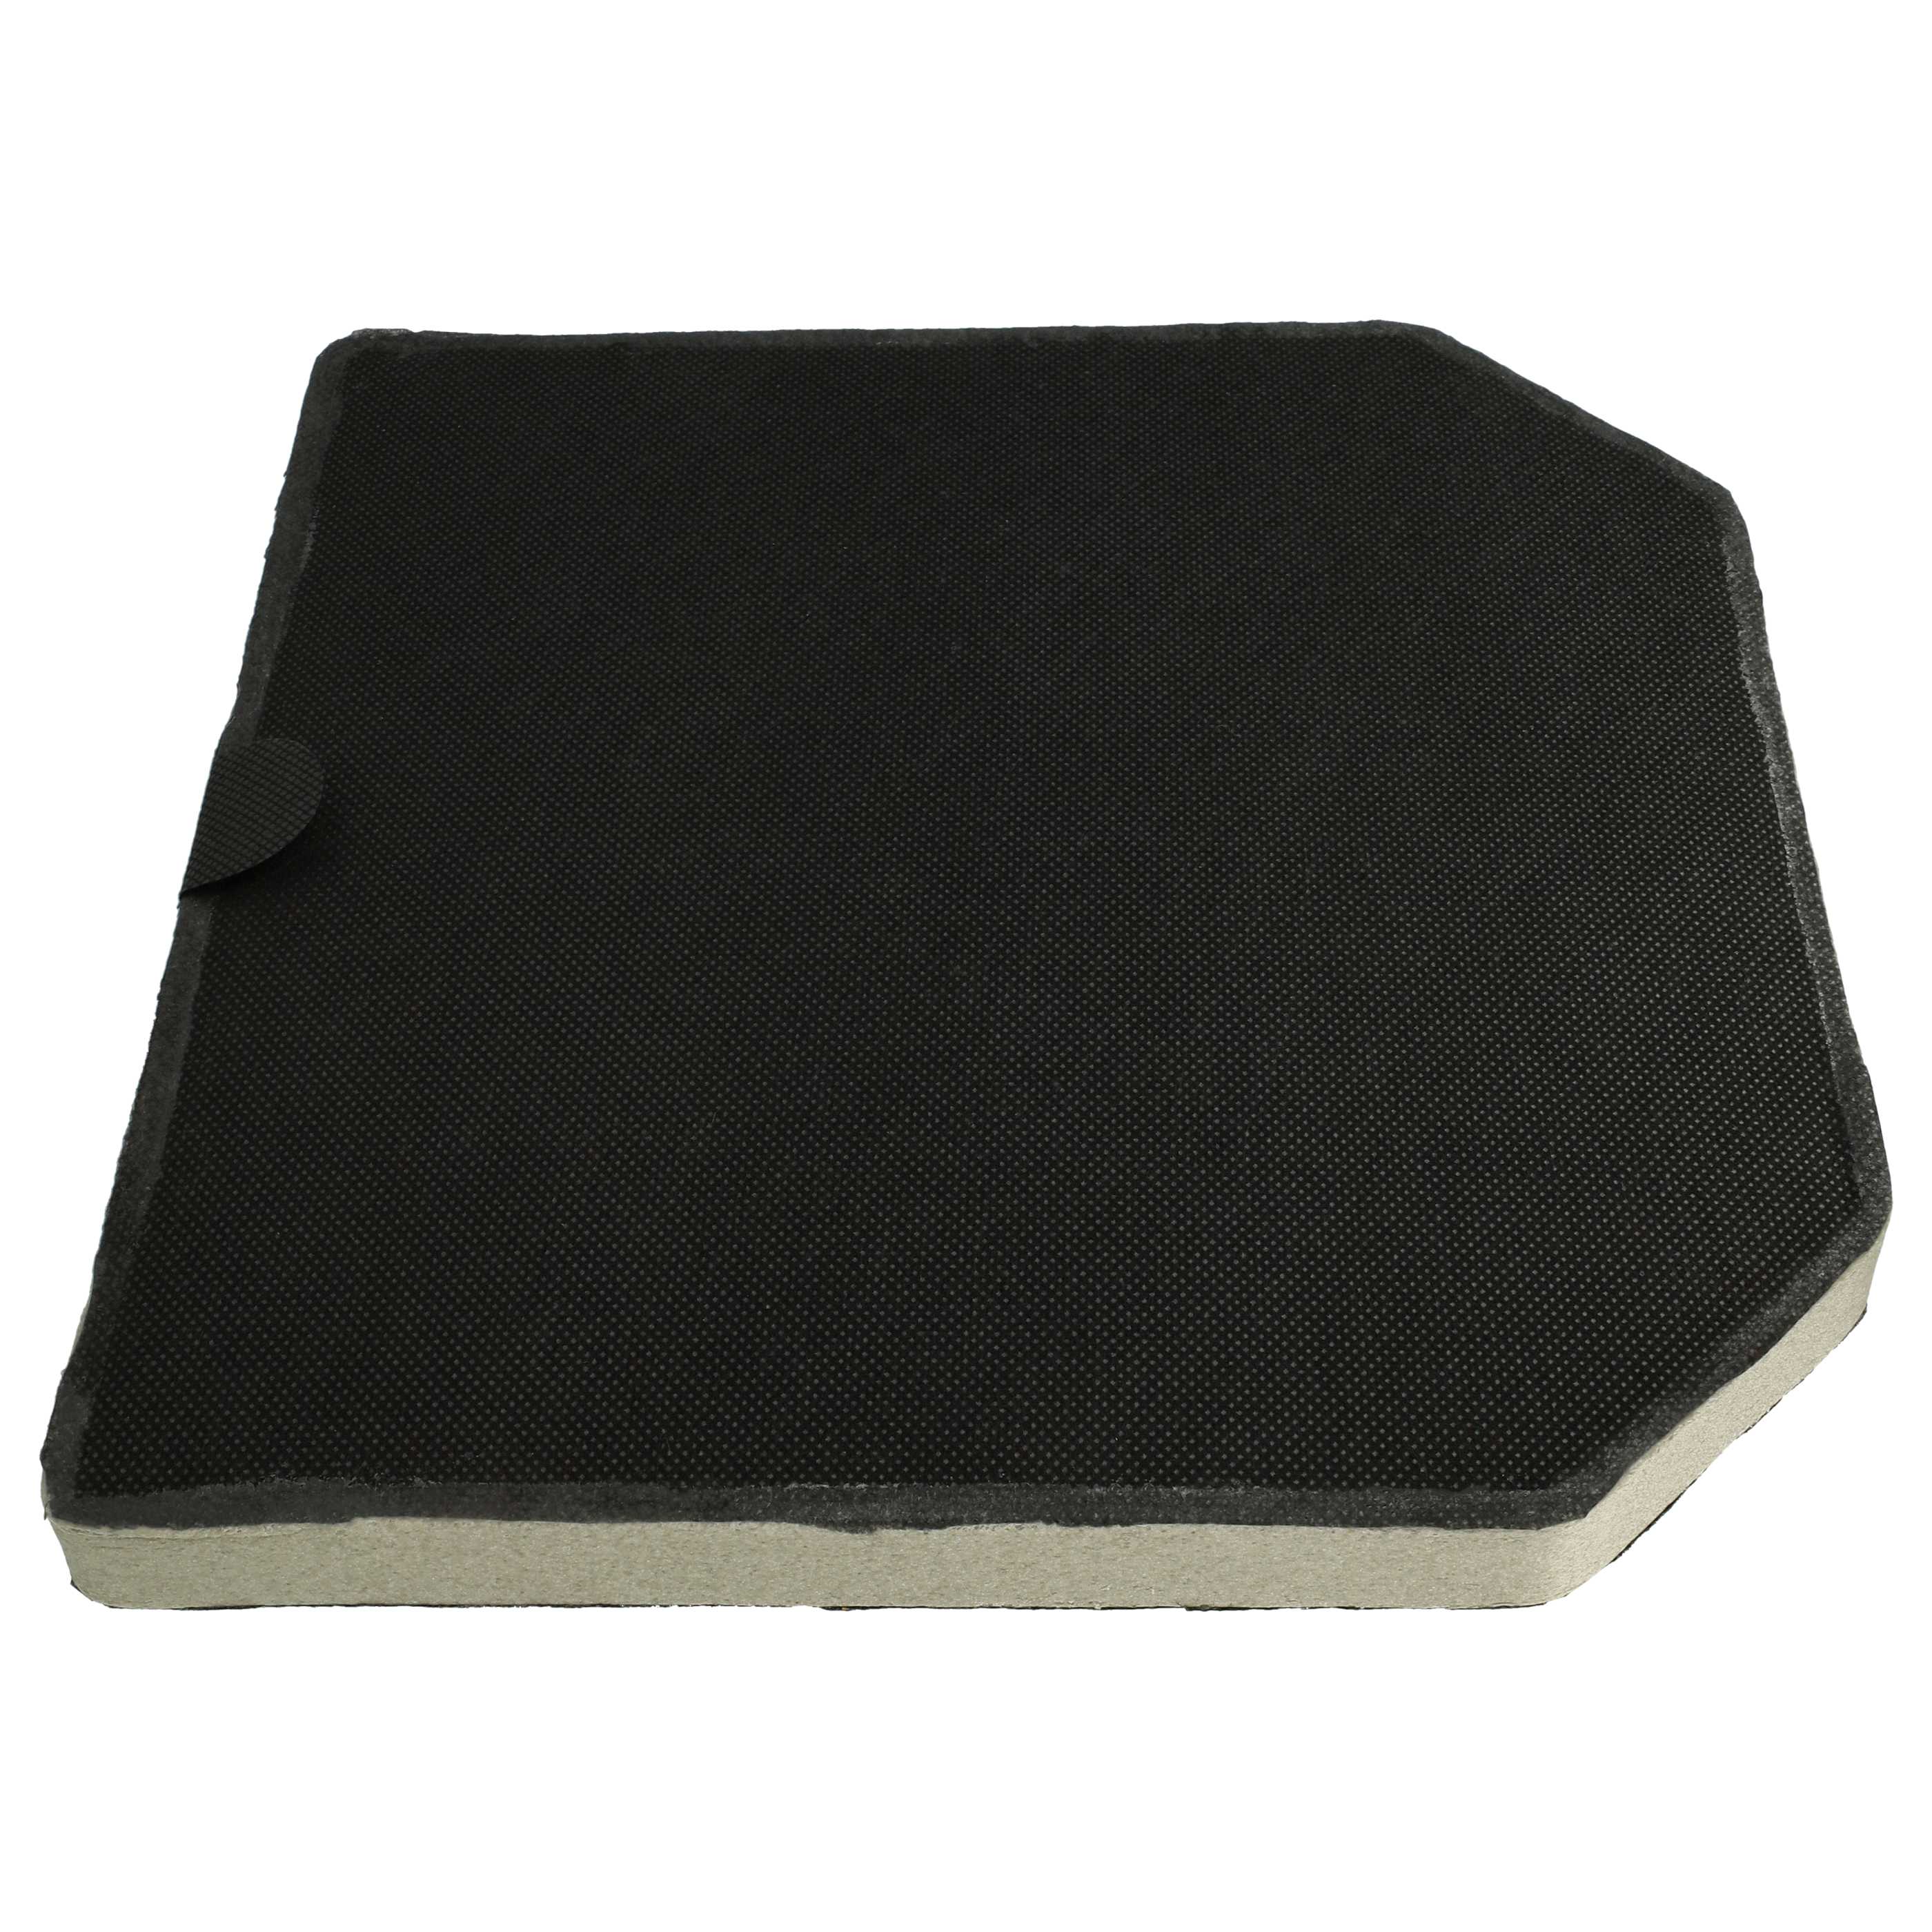 Activated Carbon Filter as Replacement for Miele 4002514268057 for Miele Hob - 24.5 x 24.5 x 2 cm